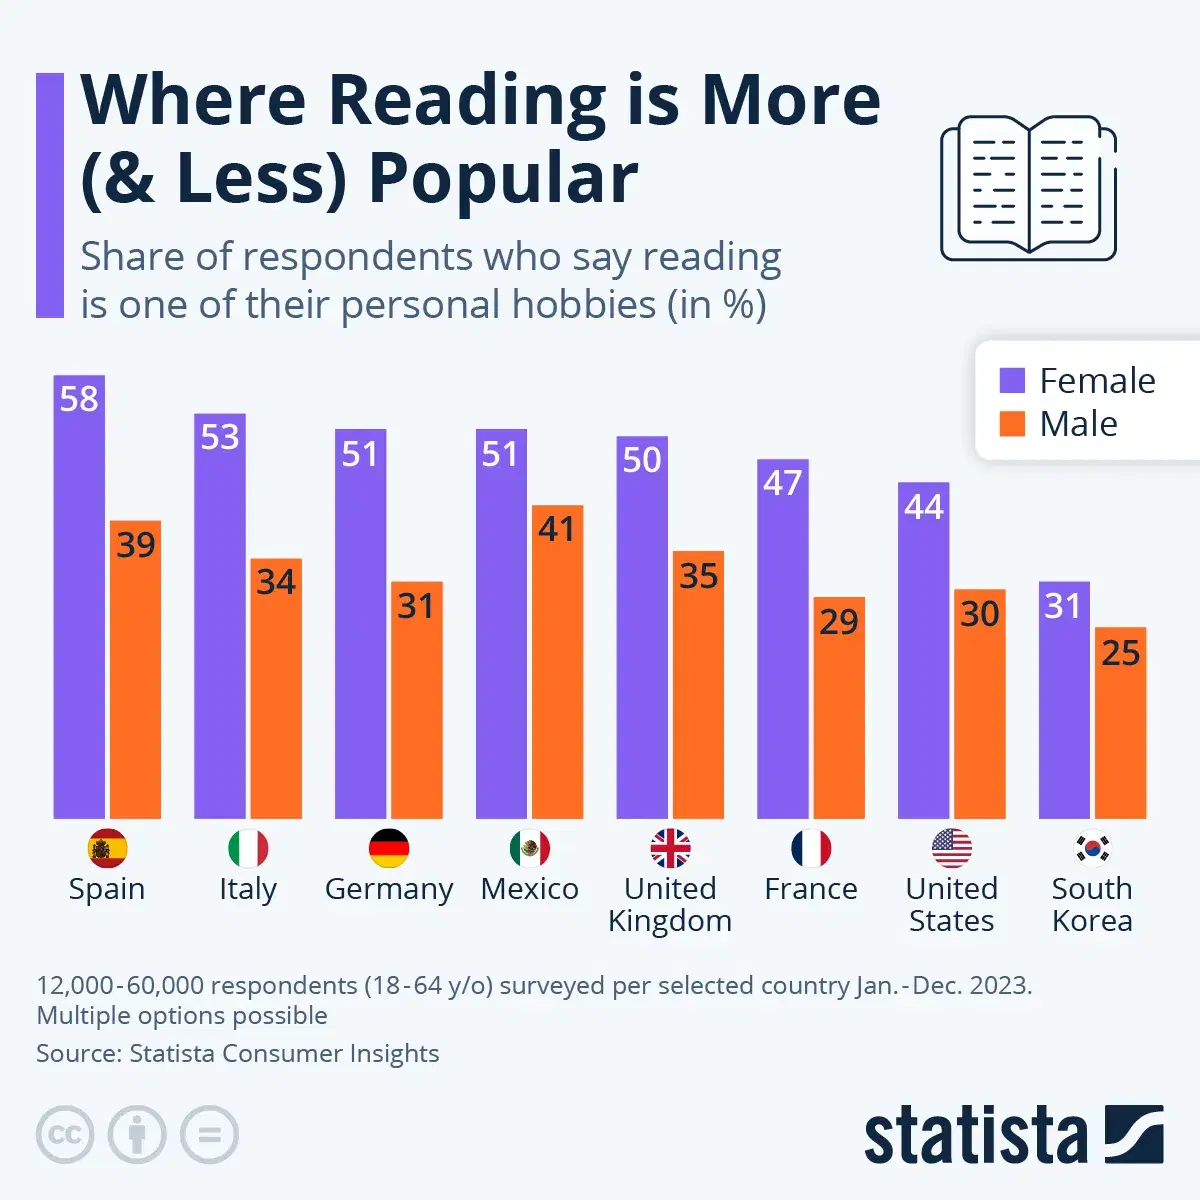 Where Reading is More (and Less) Popular